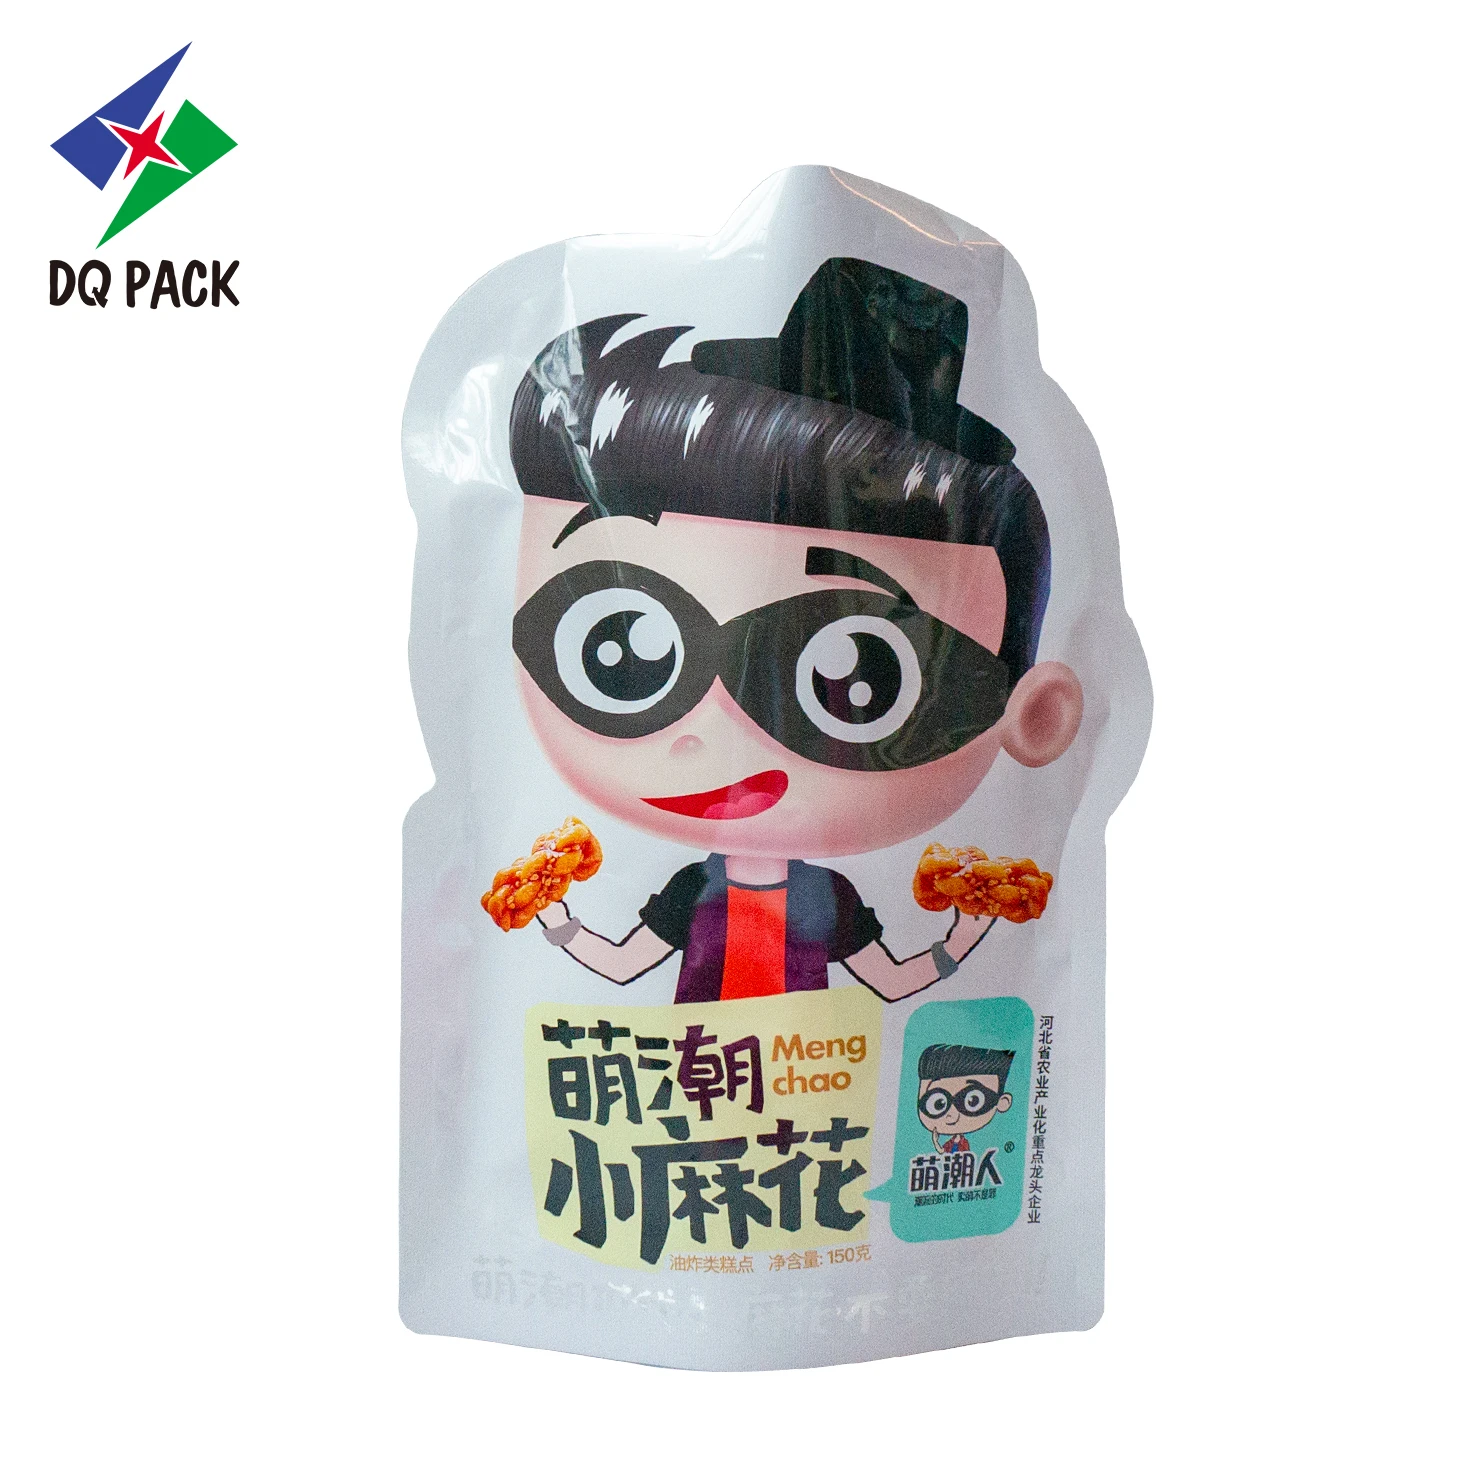 High qualtity DQ PACK plastic snack special shape plastic bag for food packaging food pouch